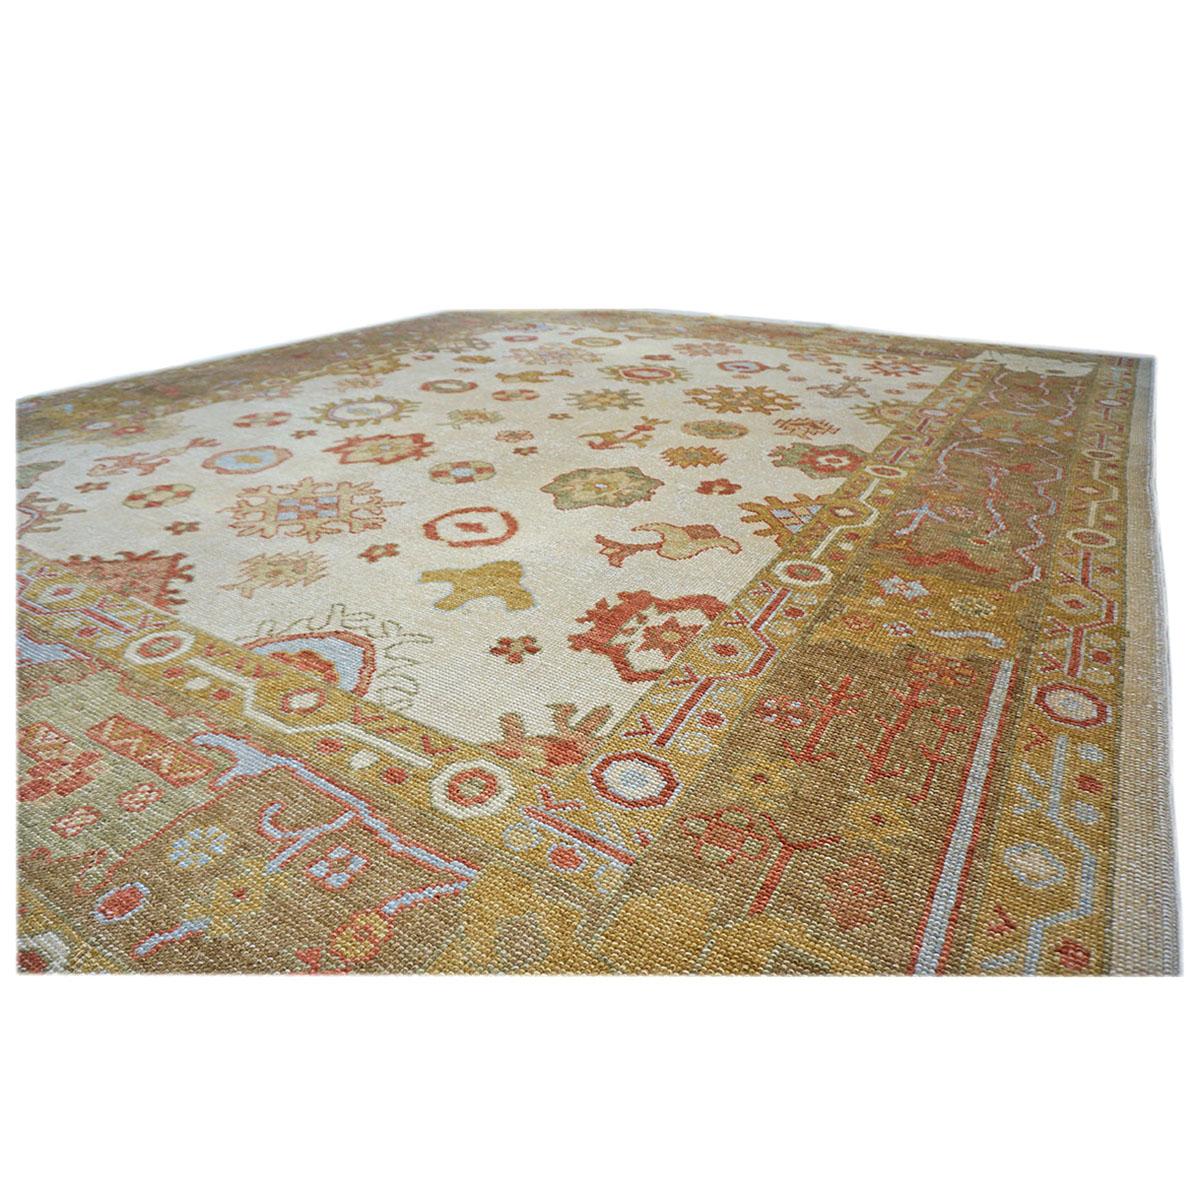 21st Century Turkish Oushak 9x11 Ivory, Yellow, & Rust Handmade Area Rug In Excellent Condition For Sale In Houston, TX